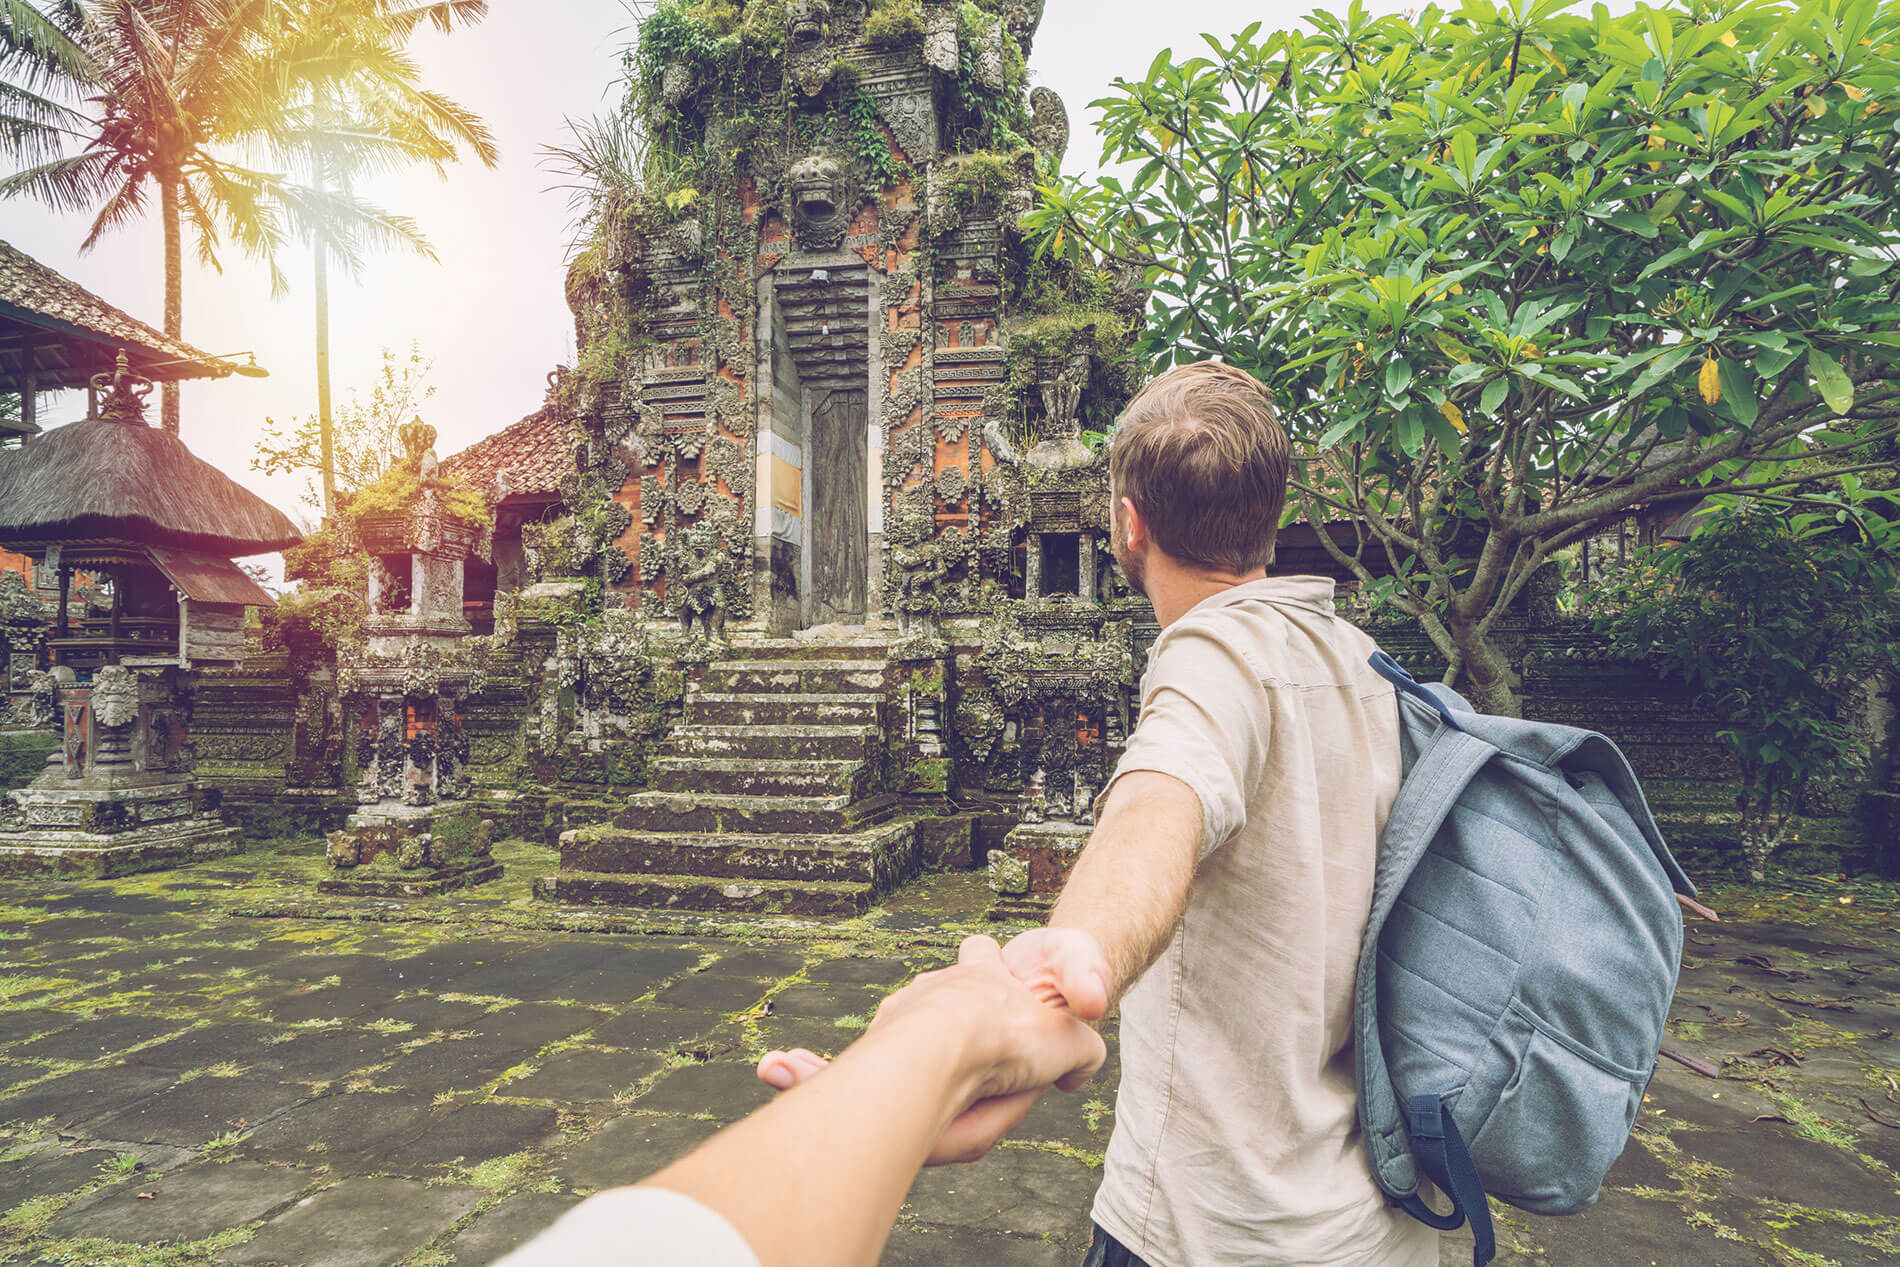 What’s So Special about Bali?